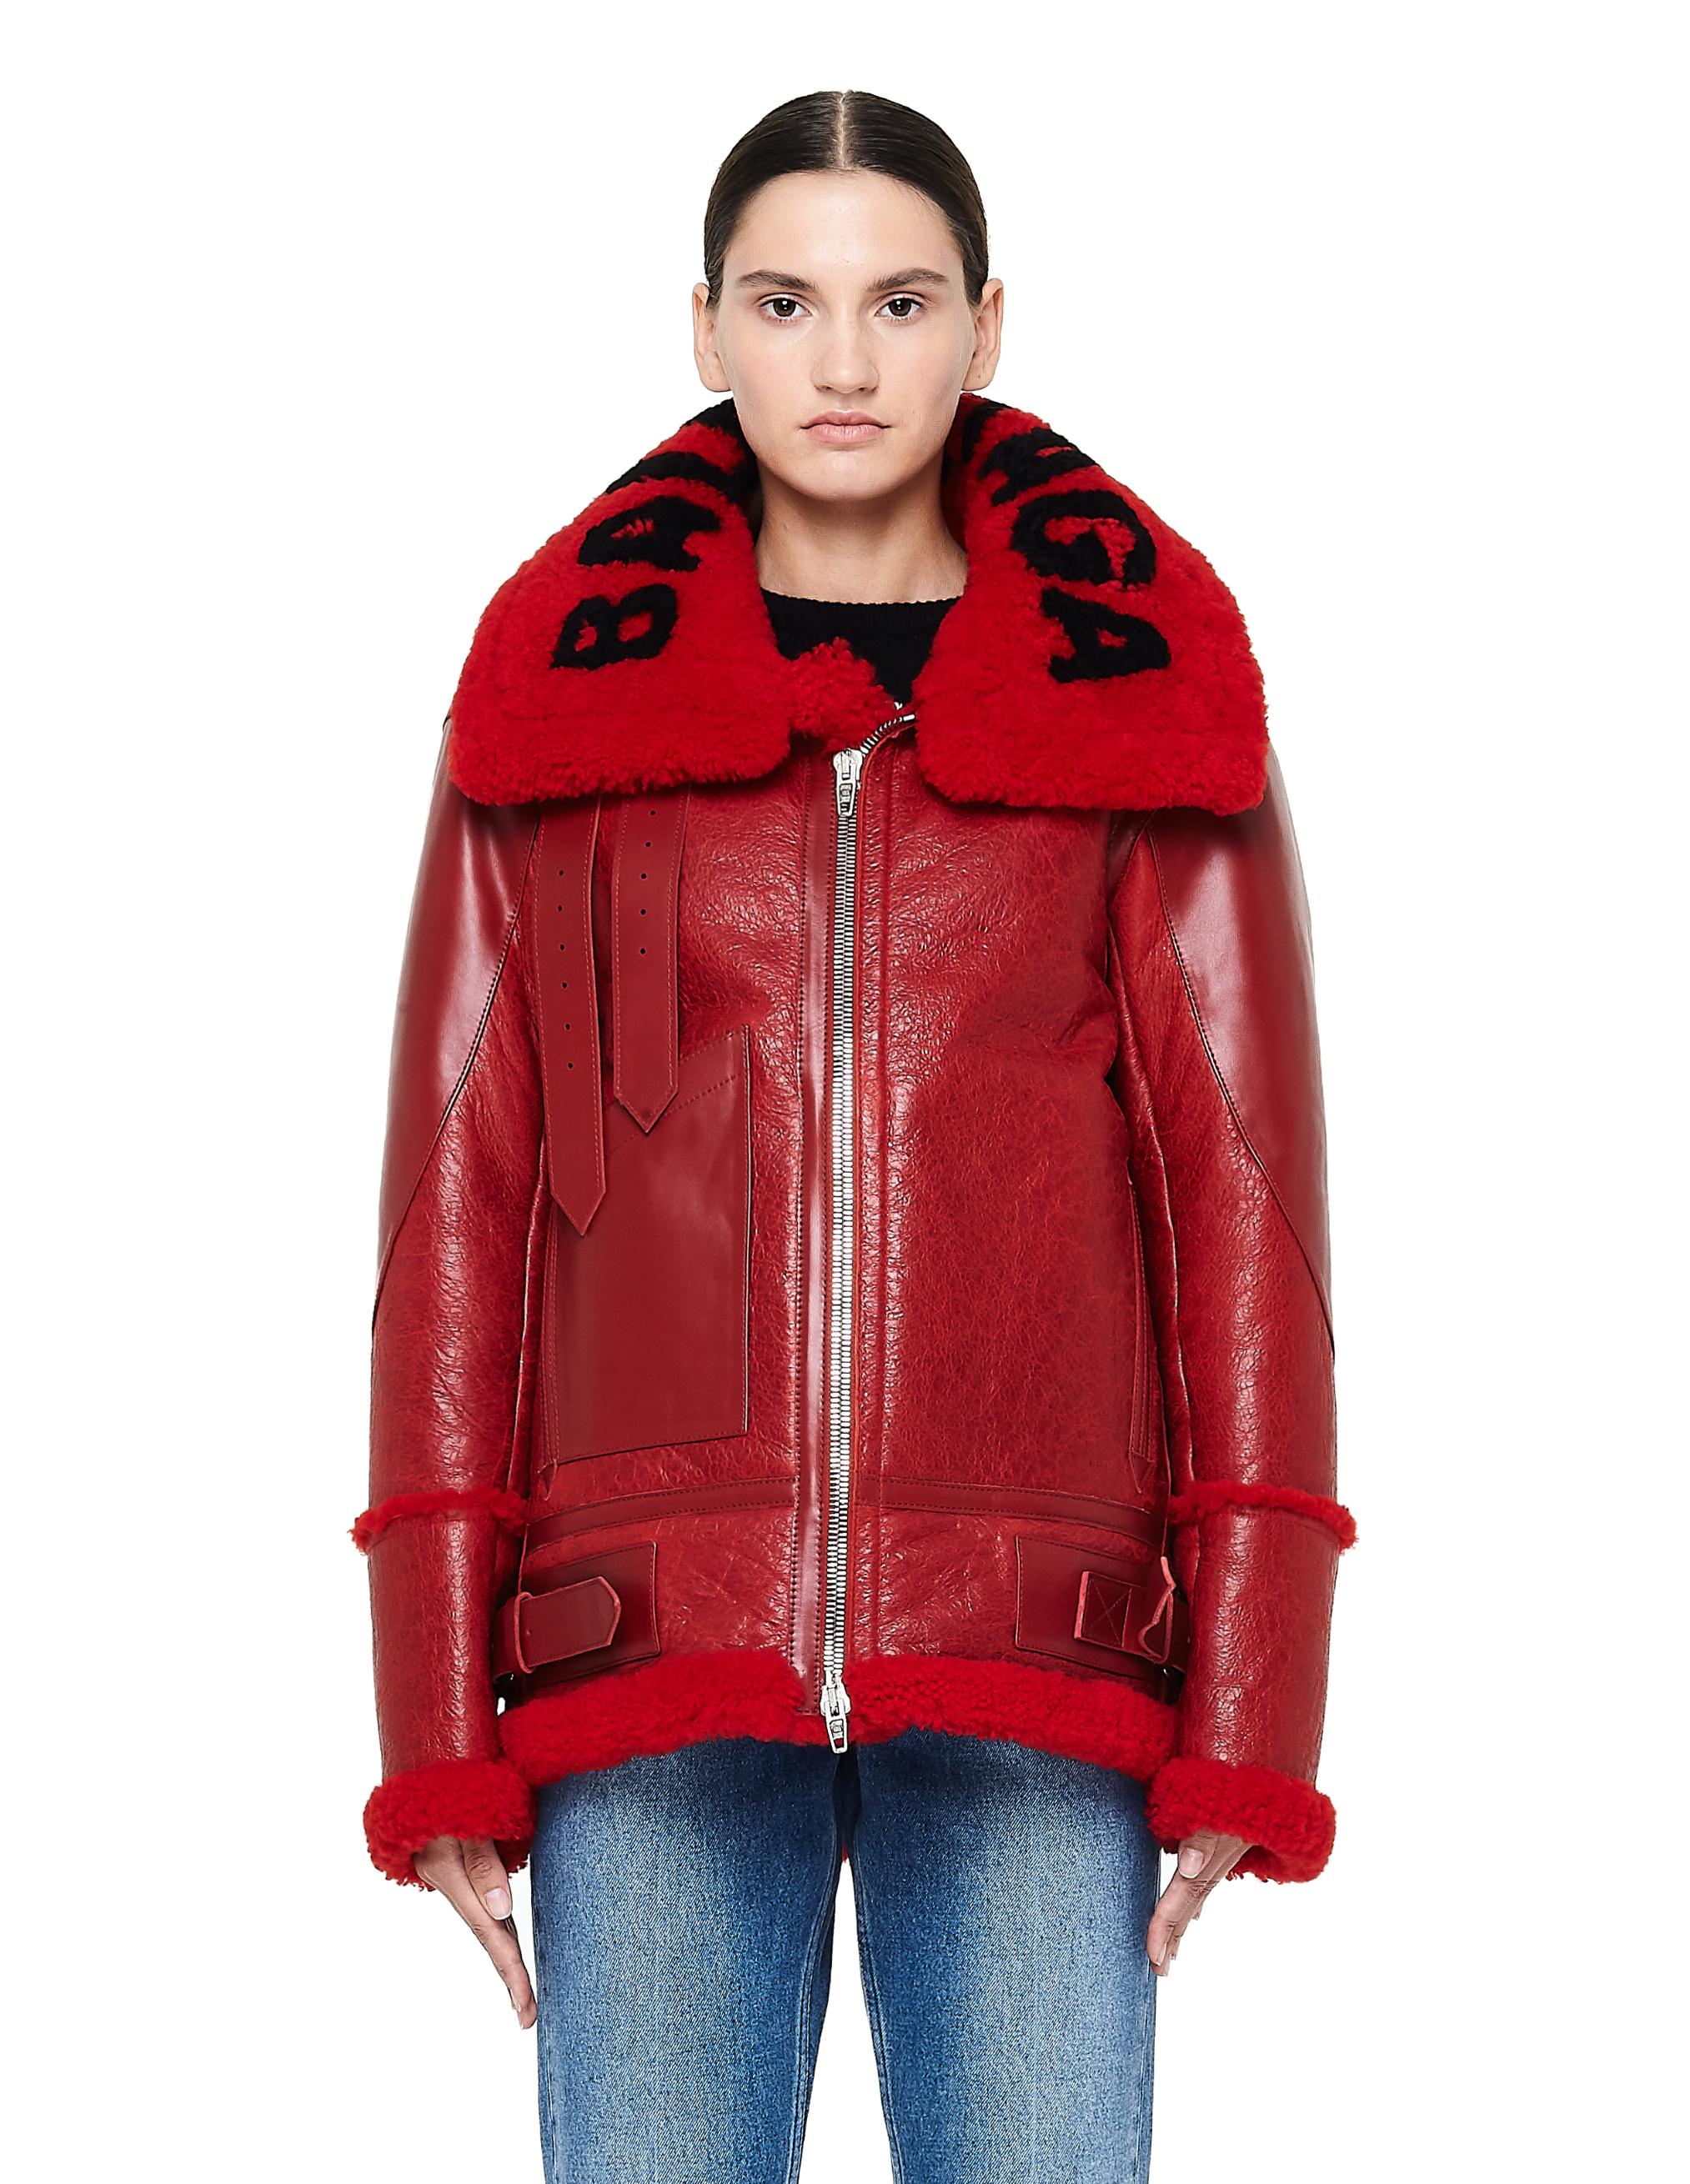 new BALENCIAGA Demna 2018 Runway Le Bombardier red leather shearling jacket M 
Reference: TGAS/C00472 
Brand: Balenciaga 
Designer: Demna 
Collection: 2018 Runway 
Material: Leather 
Color: Red Pattern: Sikud 
Closure: Zip 
Extra Detail: Signature